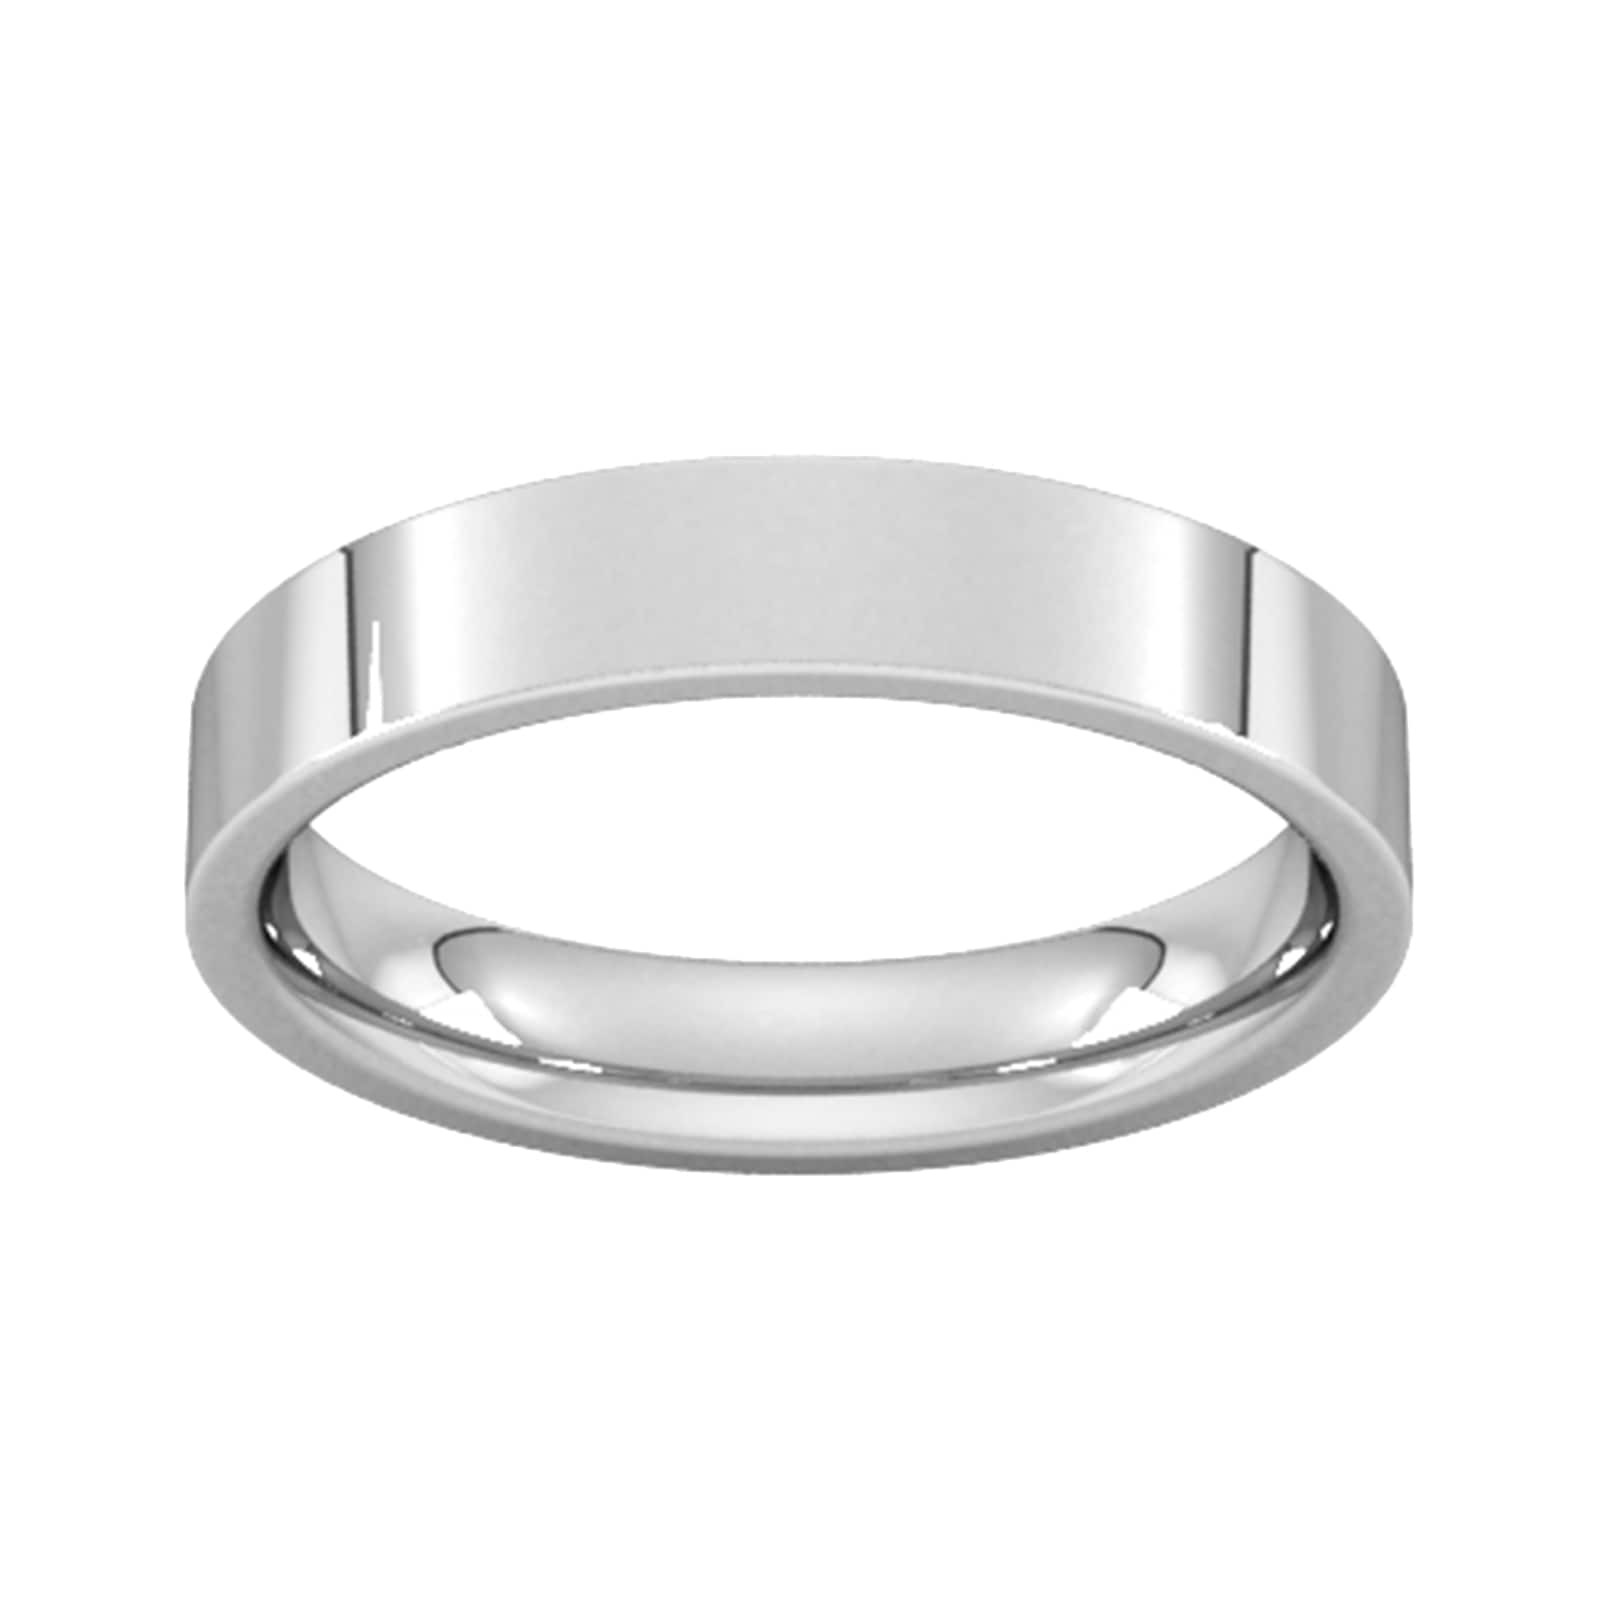 4mm Flat Court Heavy Wedding Ring In 18 Carat White Gold - Ring Size K